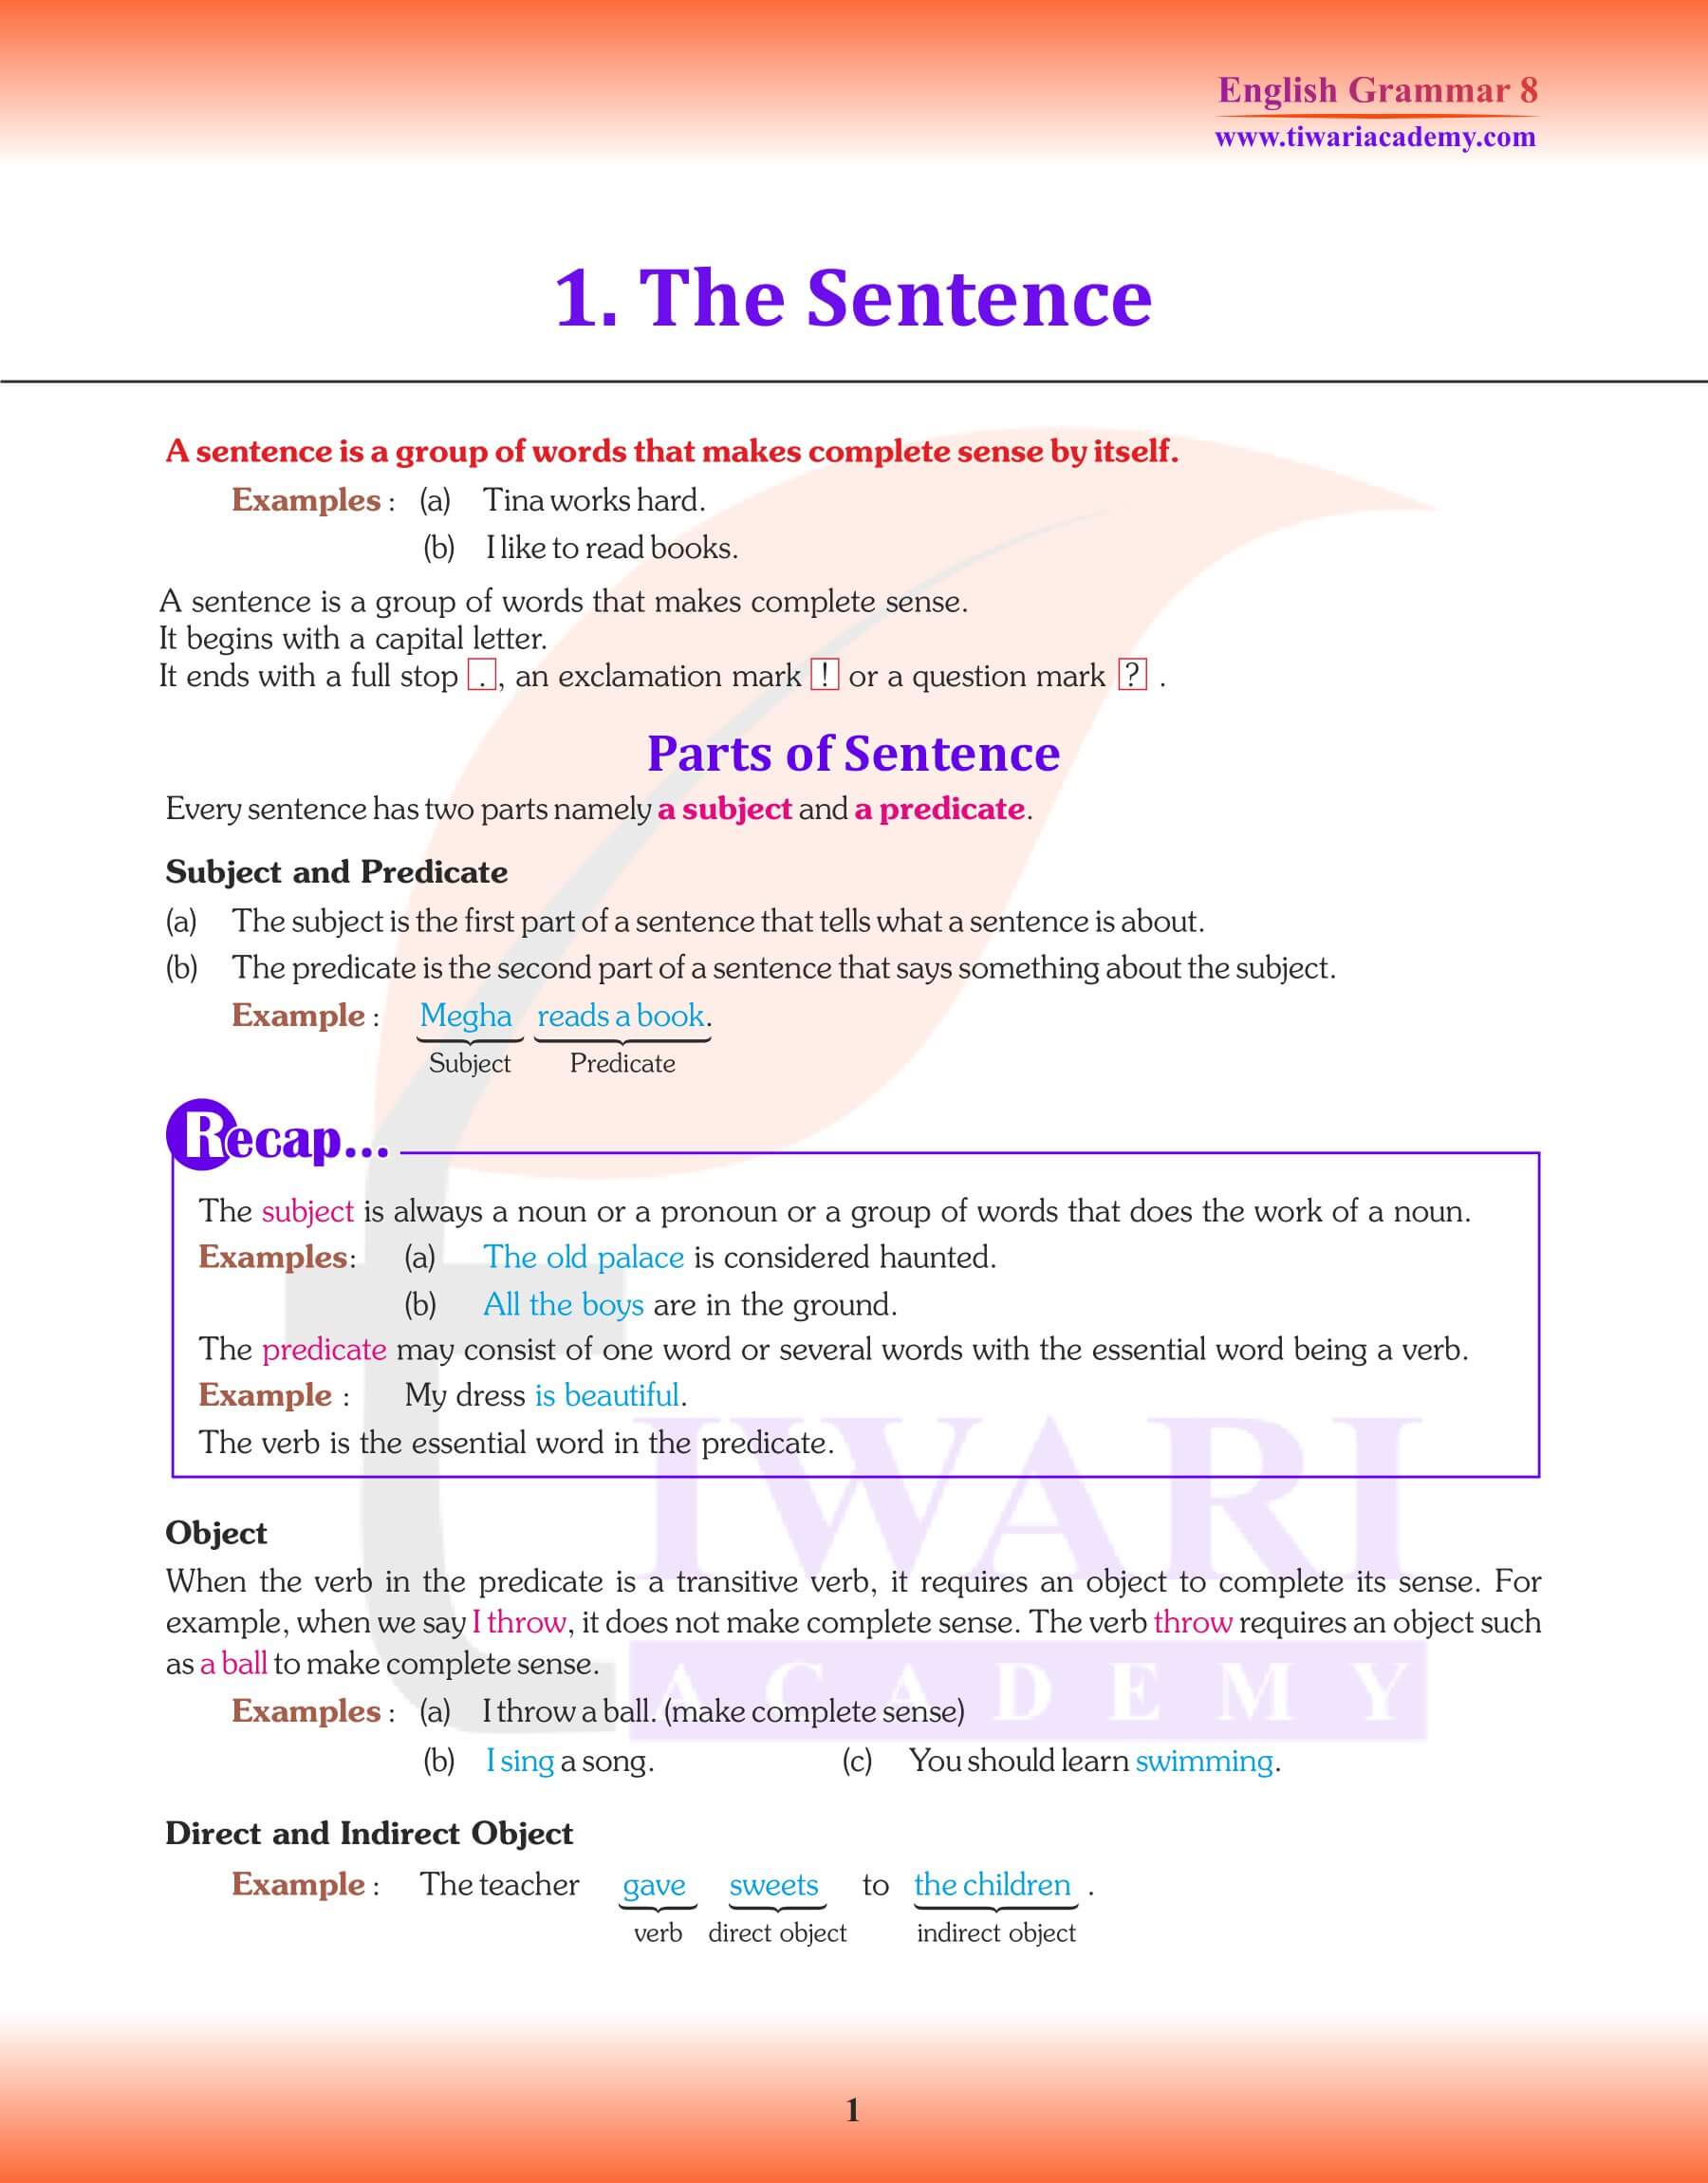 Class 8 English Grammar Chapter 1 The Sentence Revision